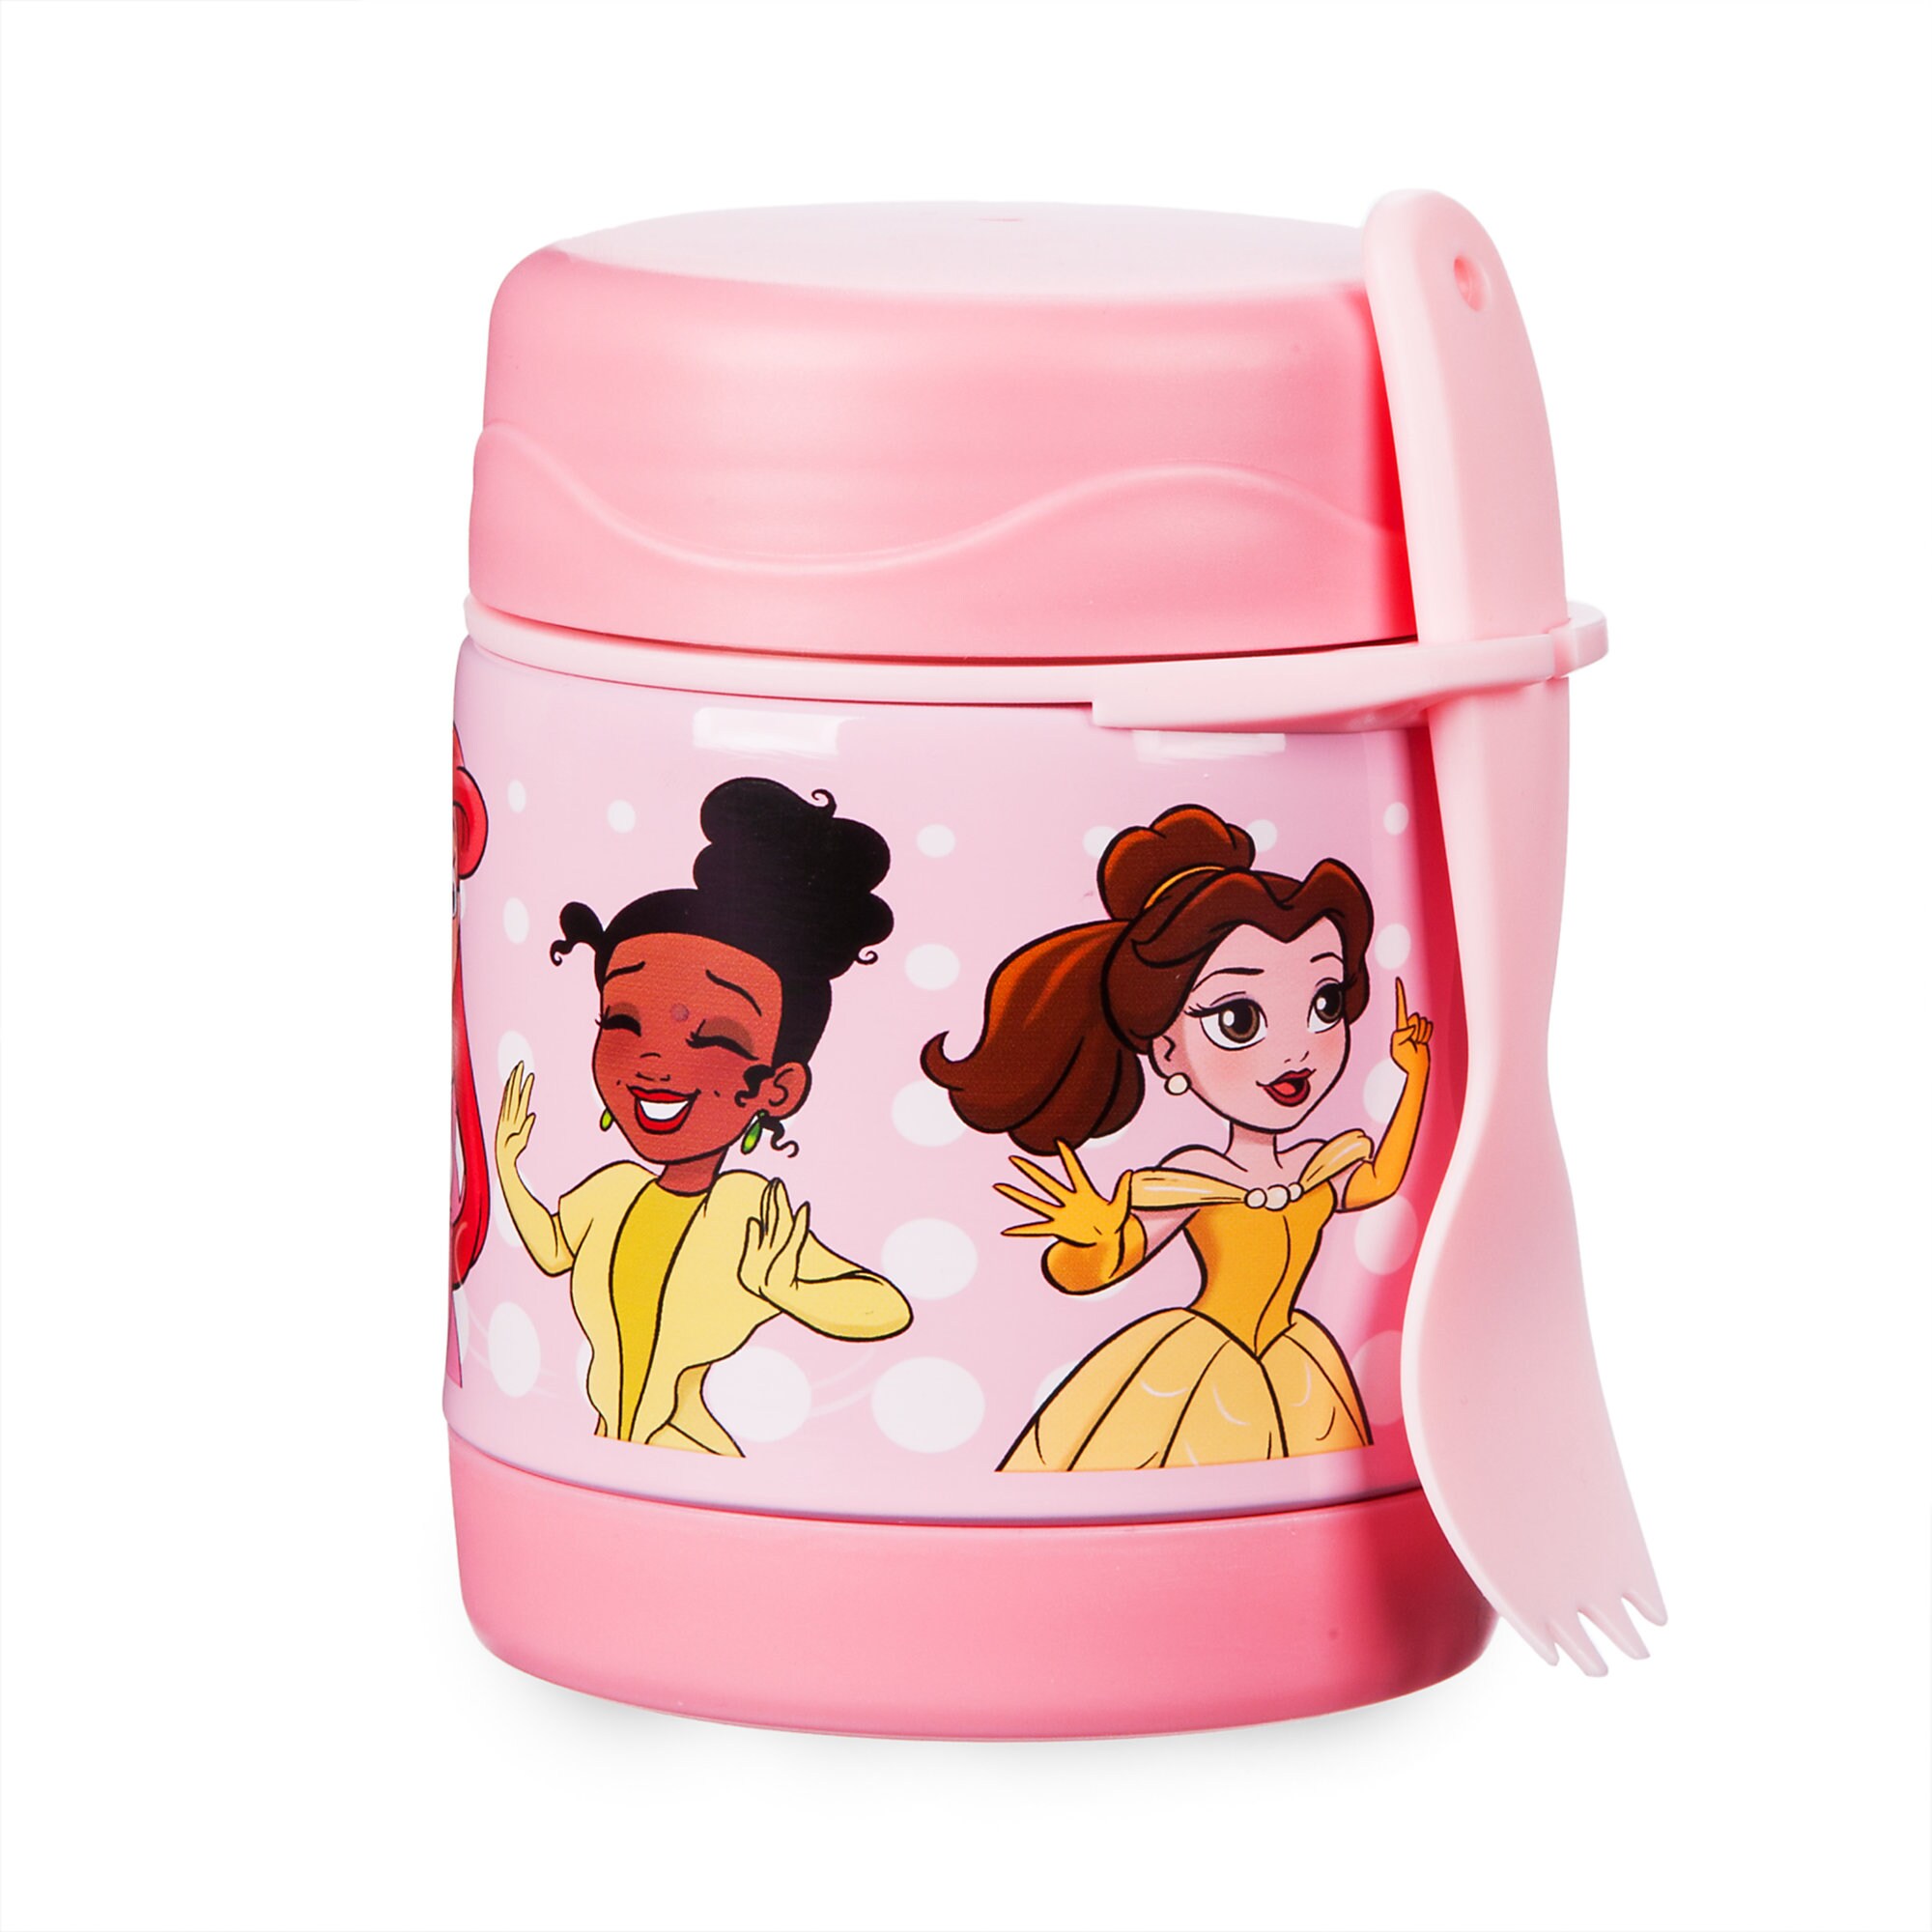 Disney Princess Hot and Cold Food Container